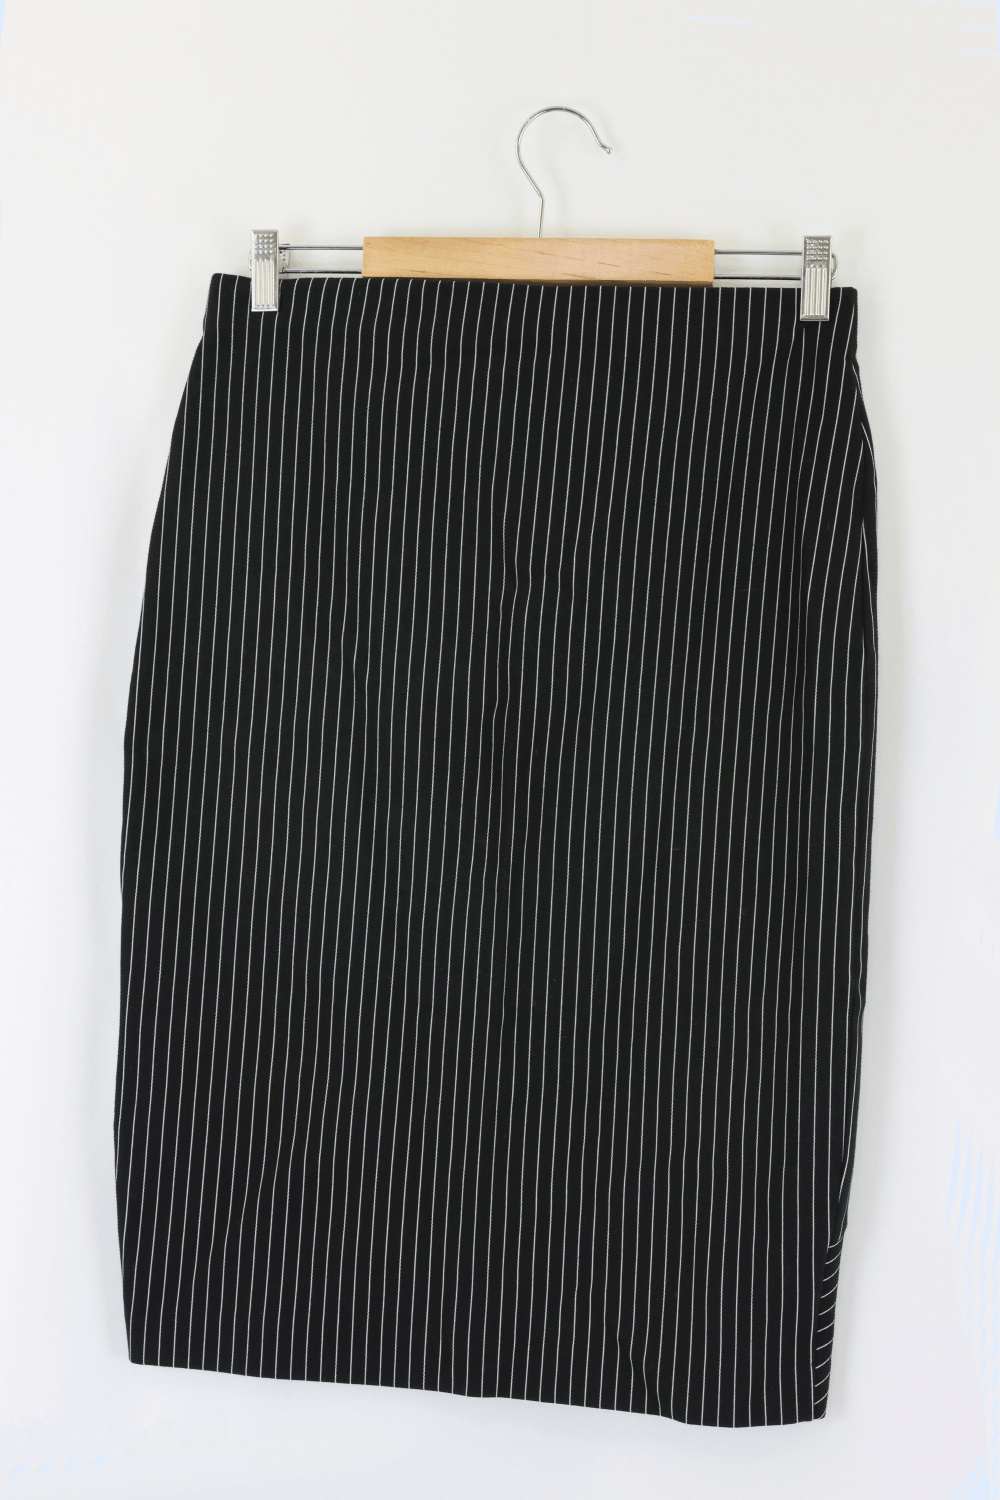 Witchery Black and White Striped Skirt 12